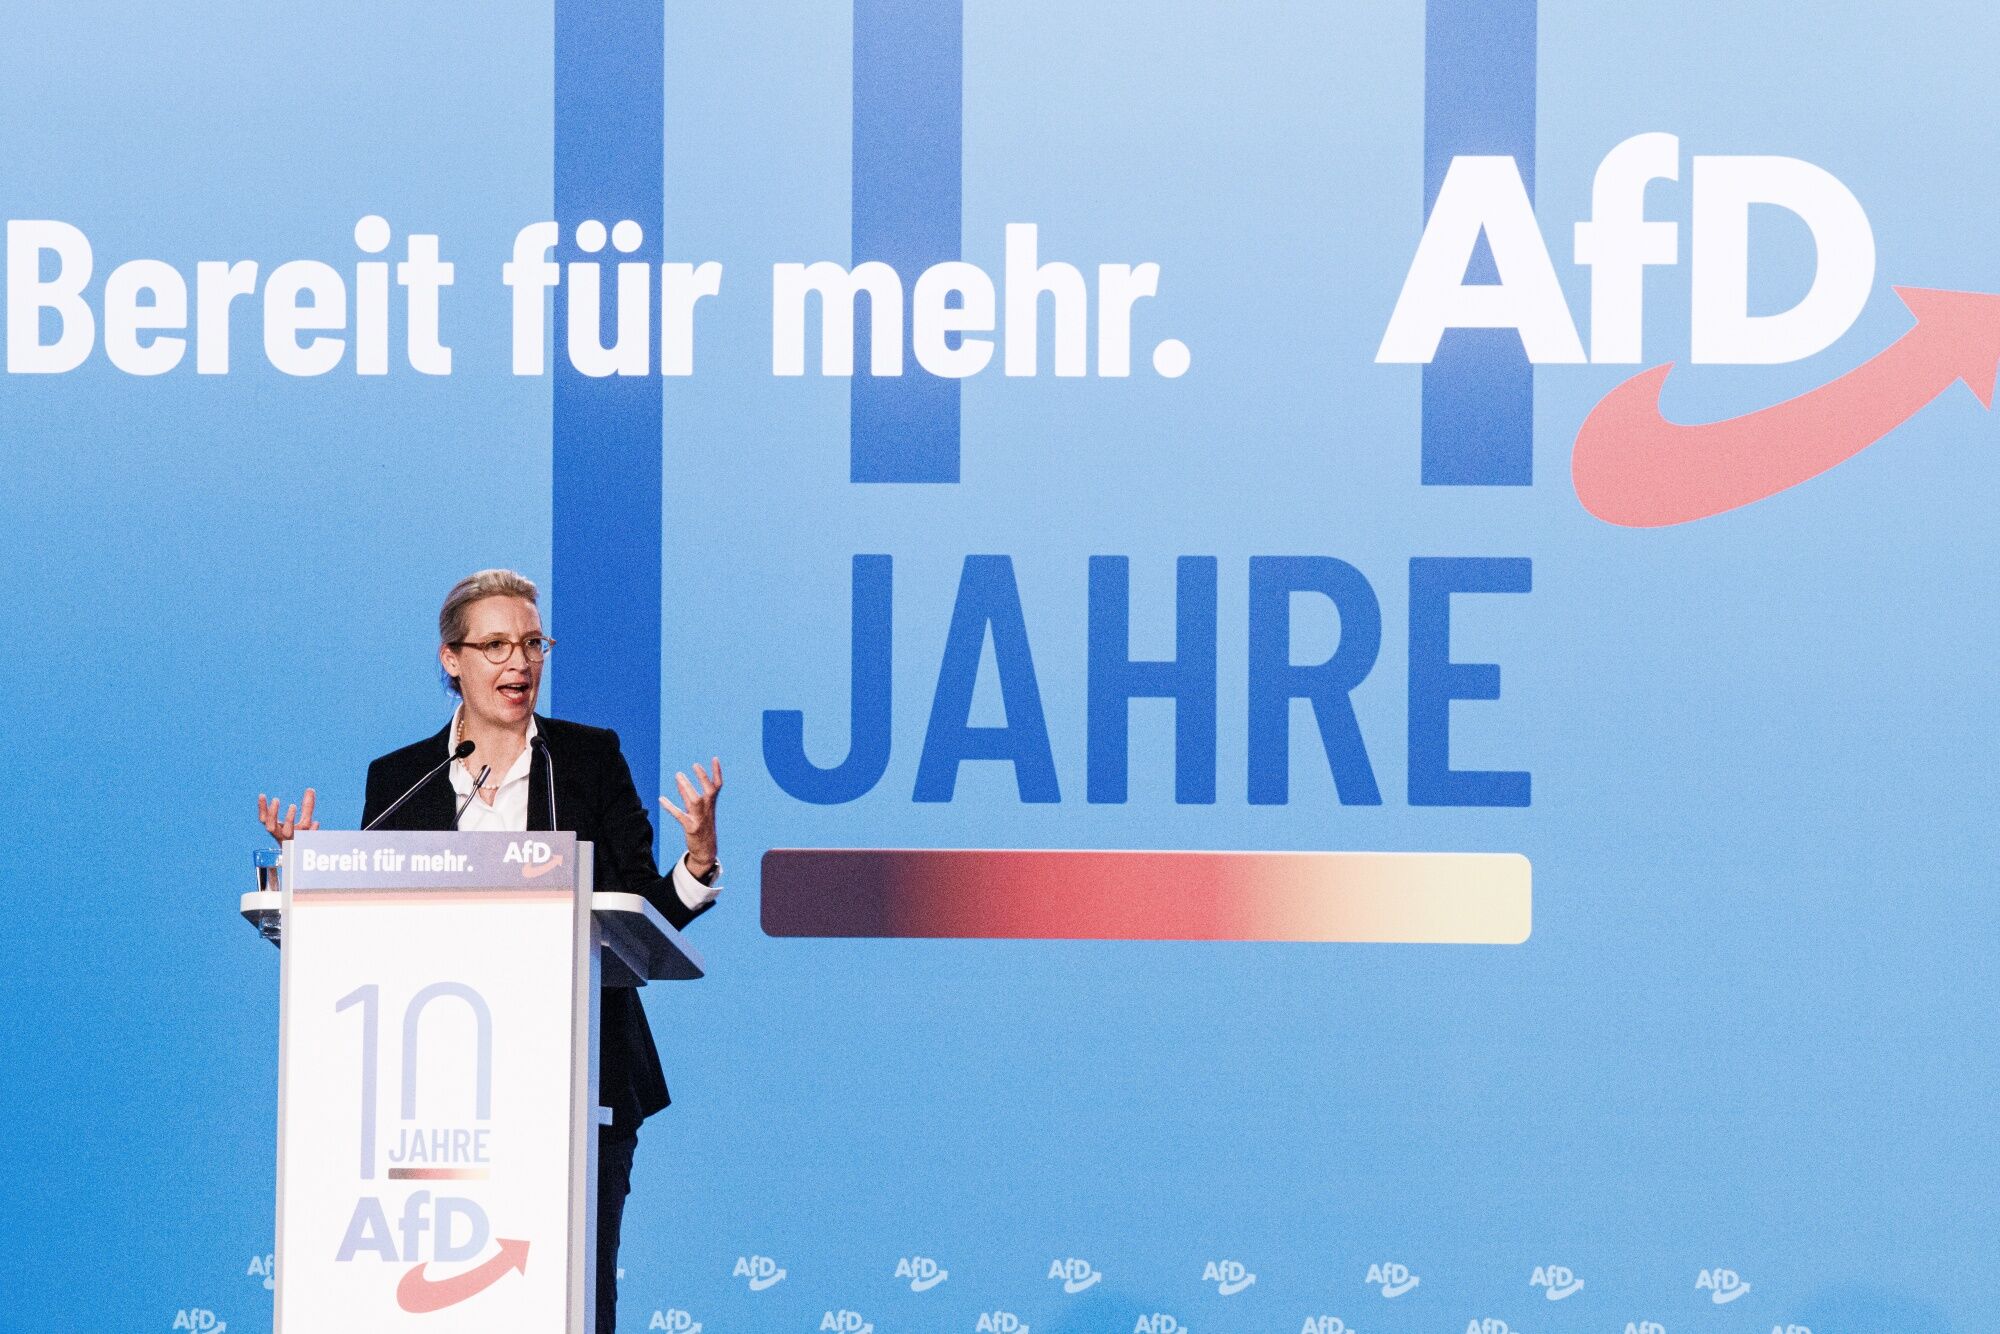 Good news from Germany: the anti-immigration Alternative for Germany (AfD) party is already on track to win a fourth term